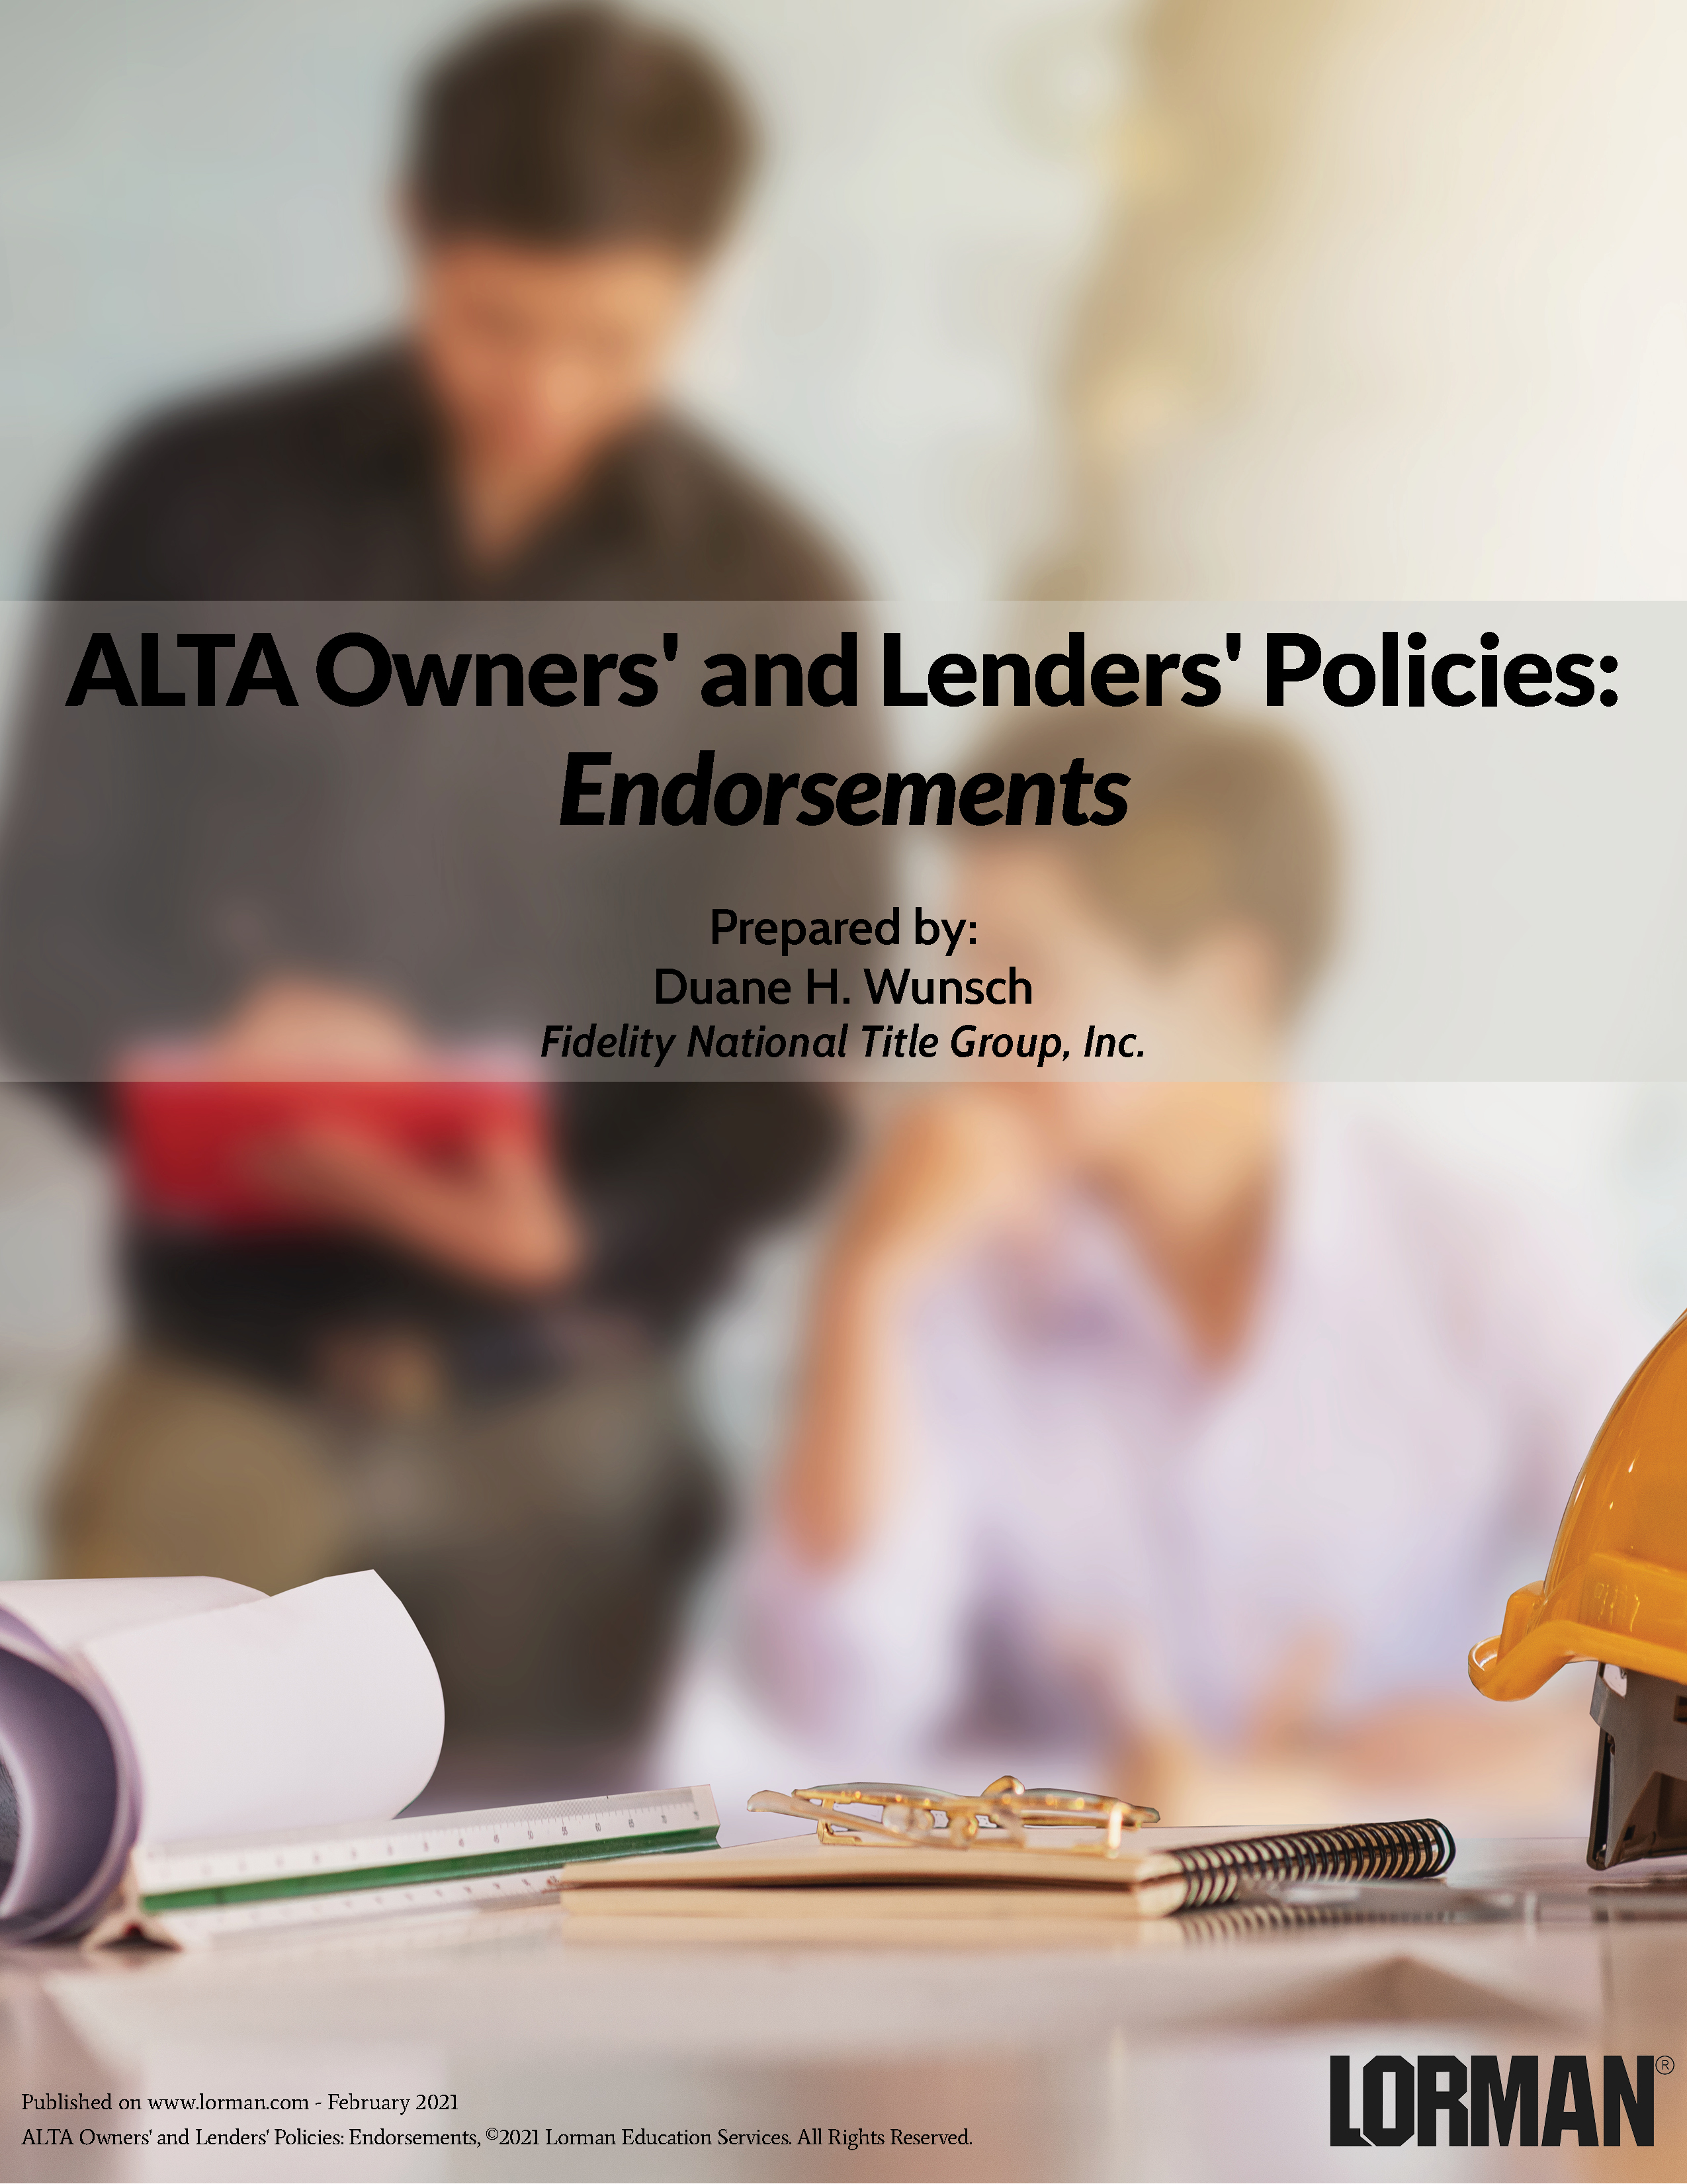 ALTA Owners' and Lenders' Policies: Endorsements